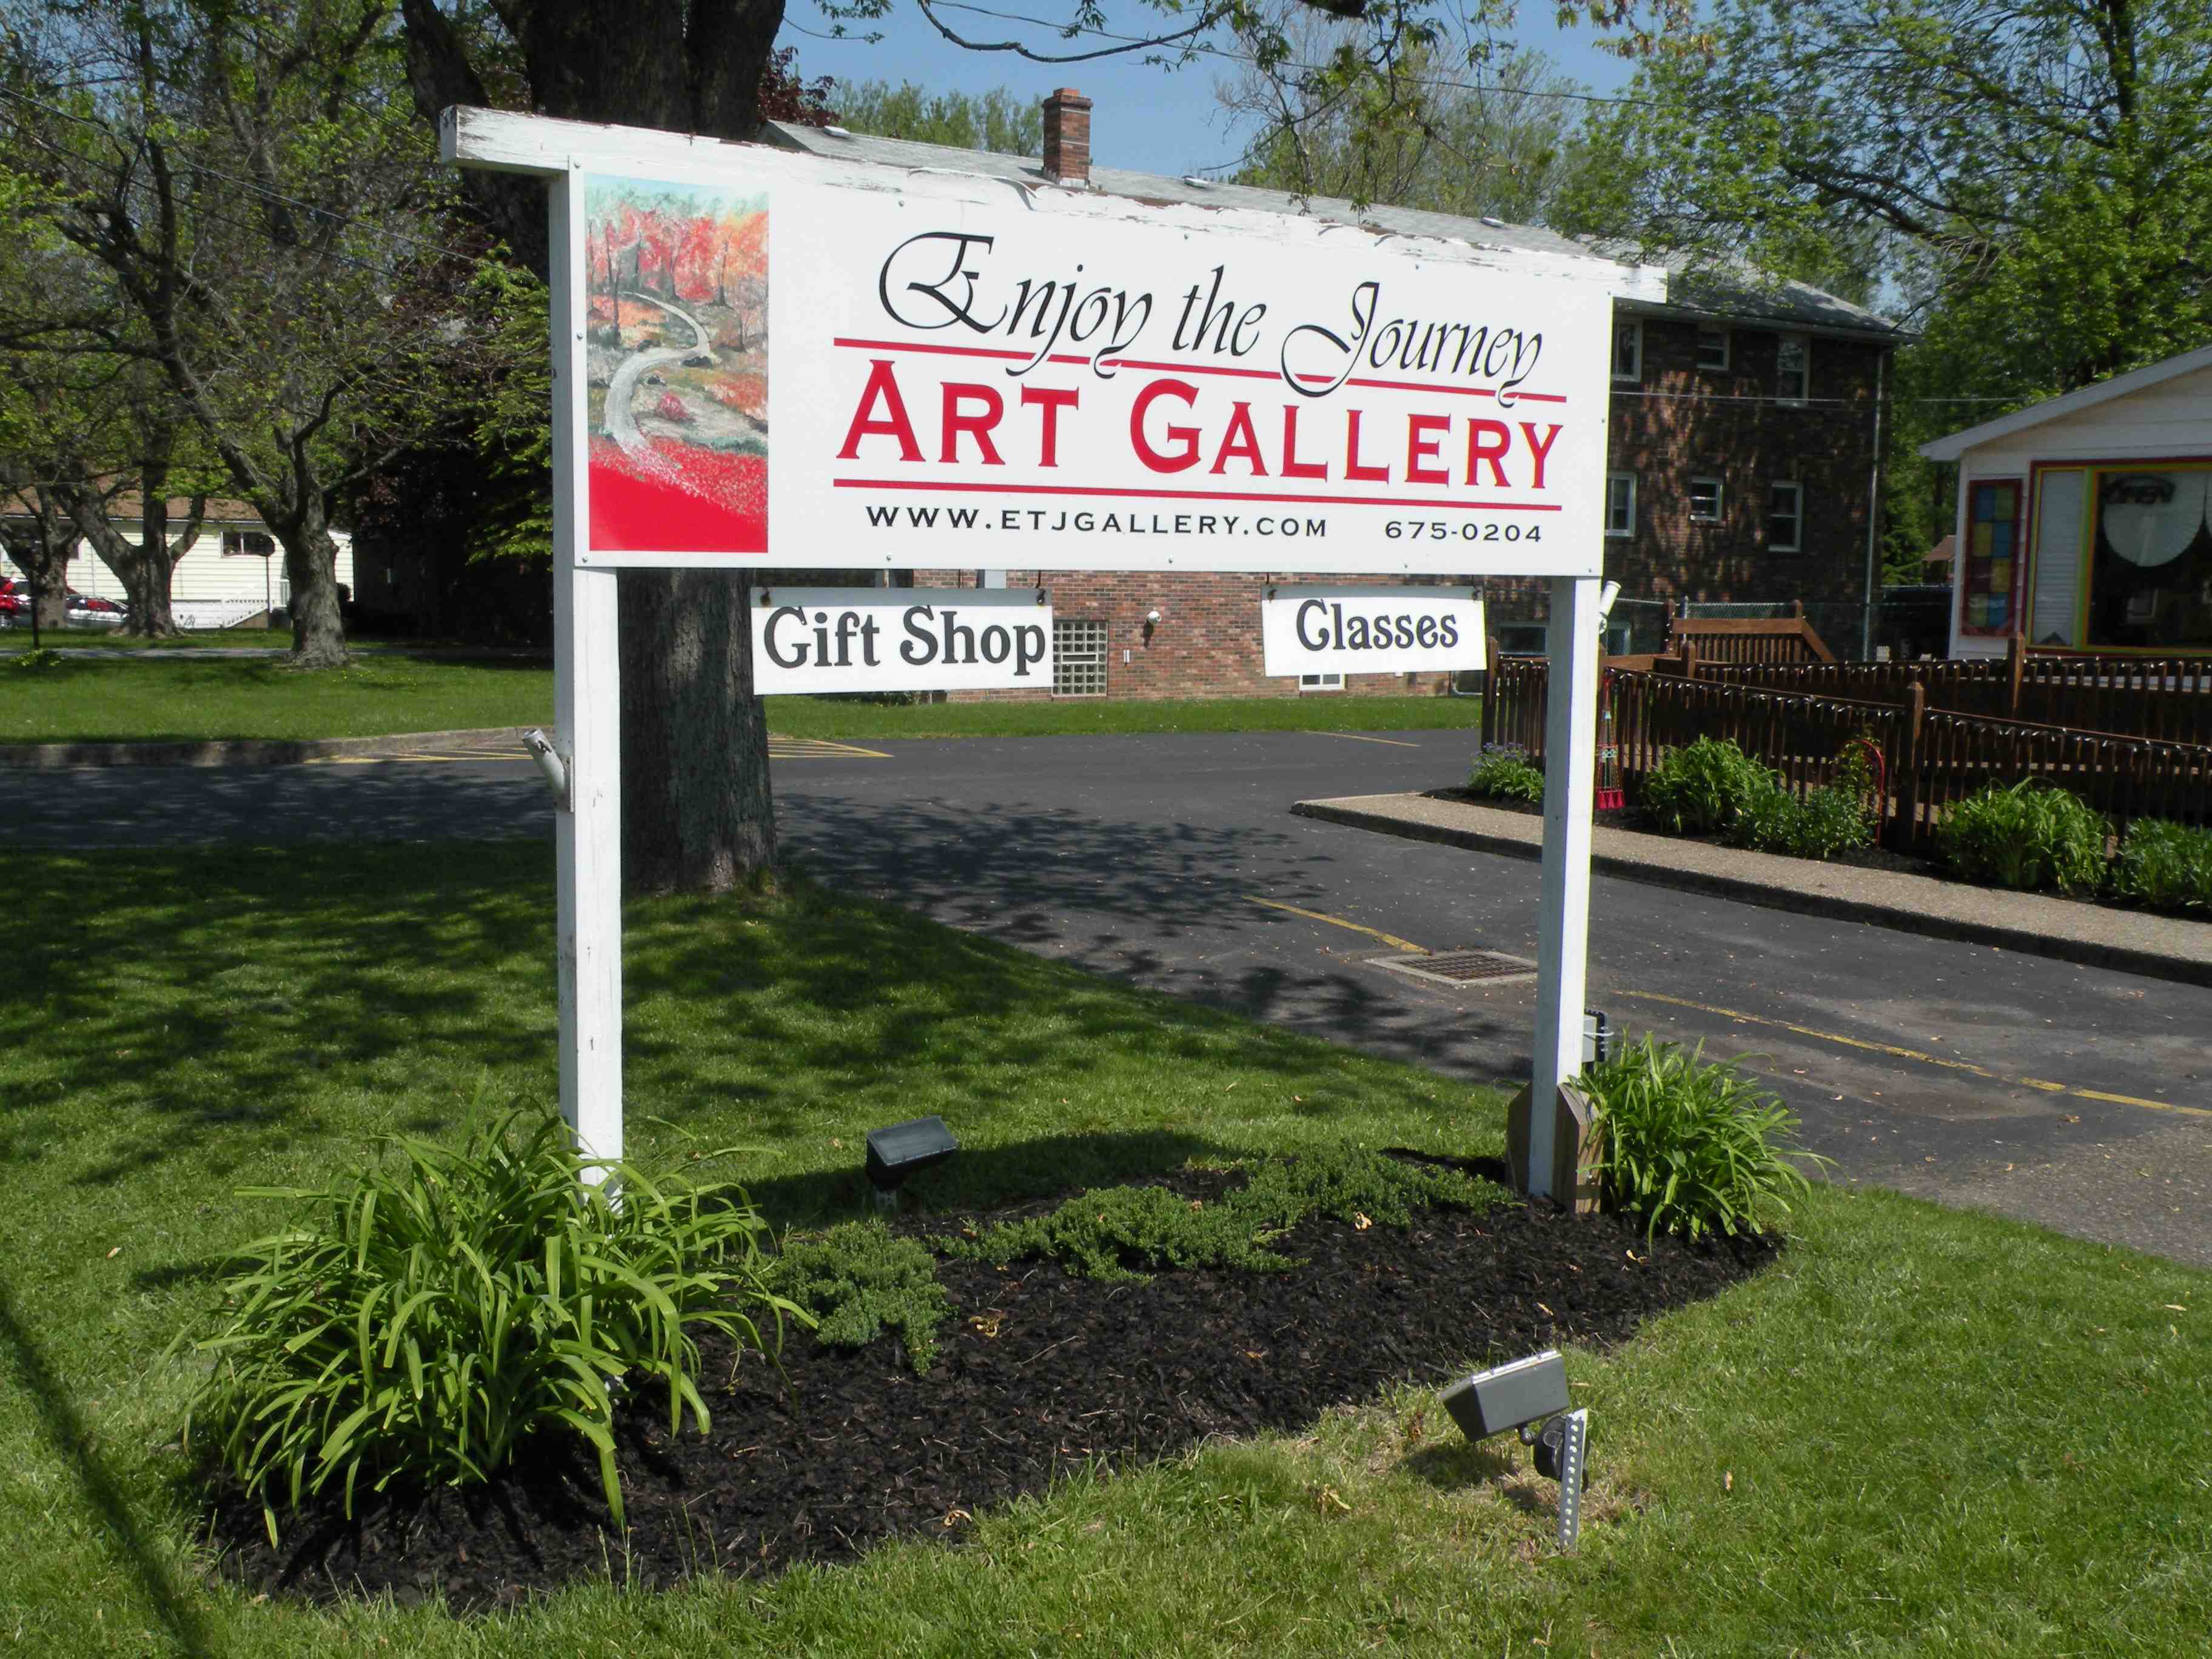 Enjoy the Journey Art Gallery lists upcoming classes and workshops